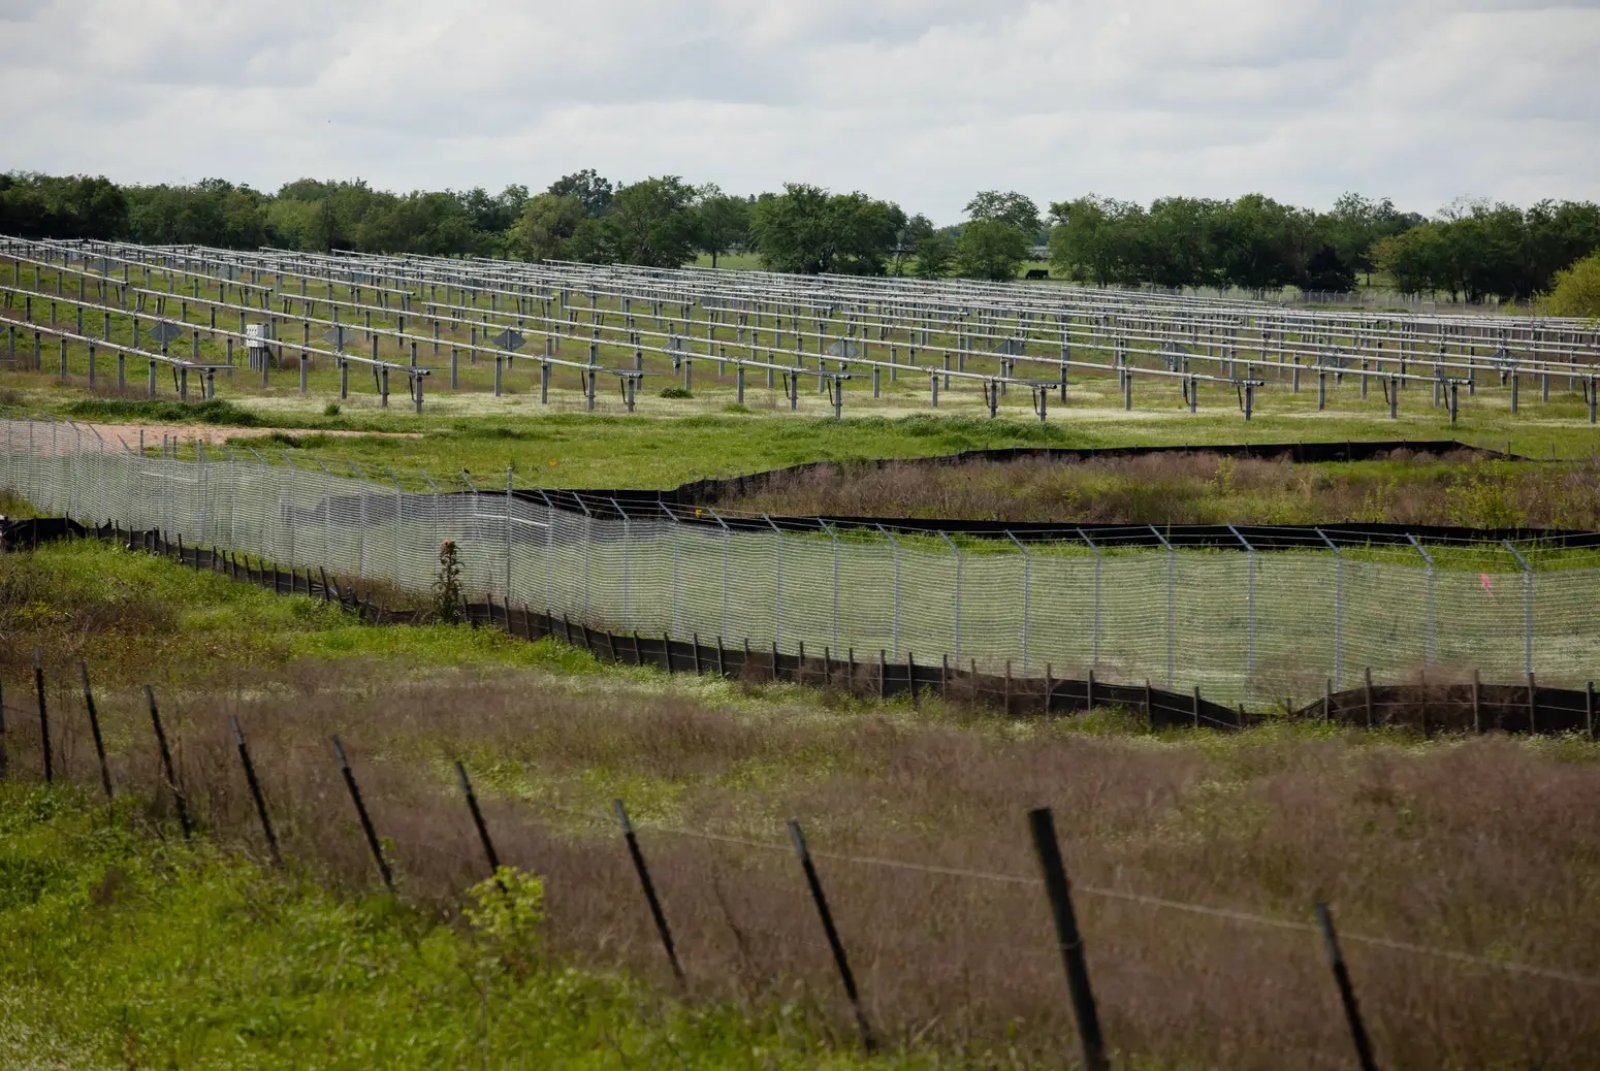 A green and muddy field filled with solar panels.